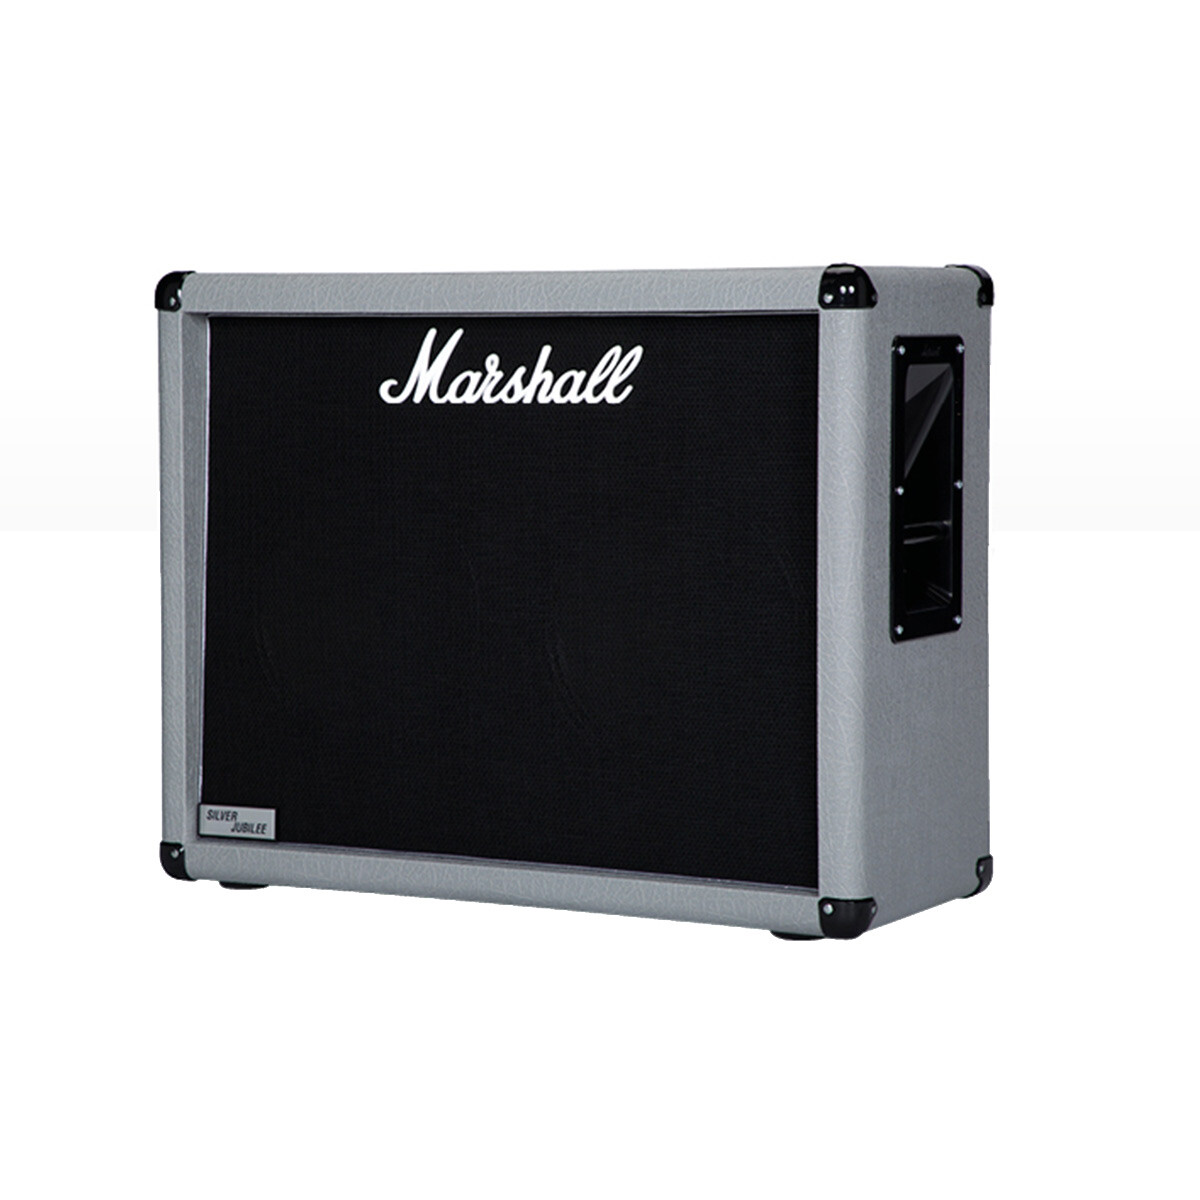 Cabinet Guitarra Marshall Silver Jubile 140w 2x12 